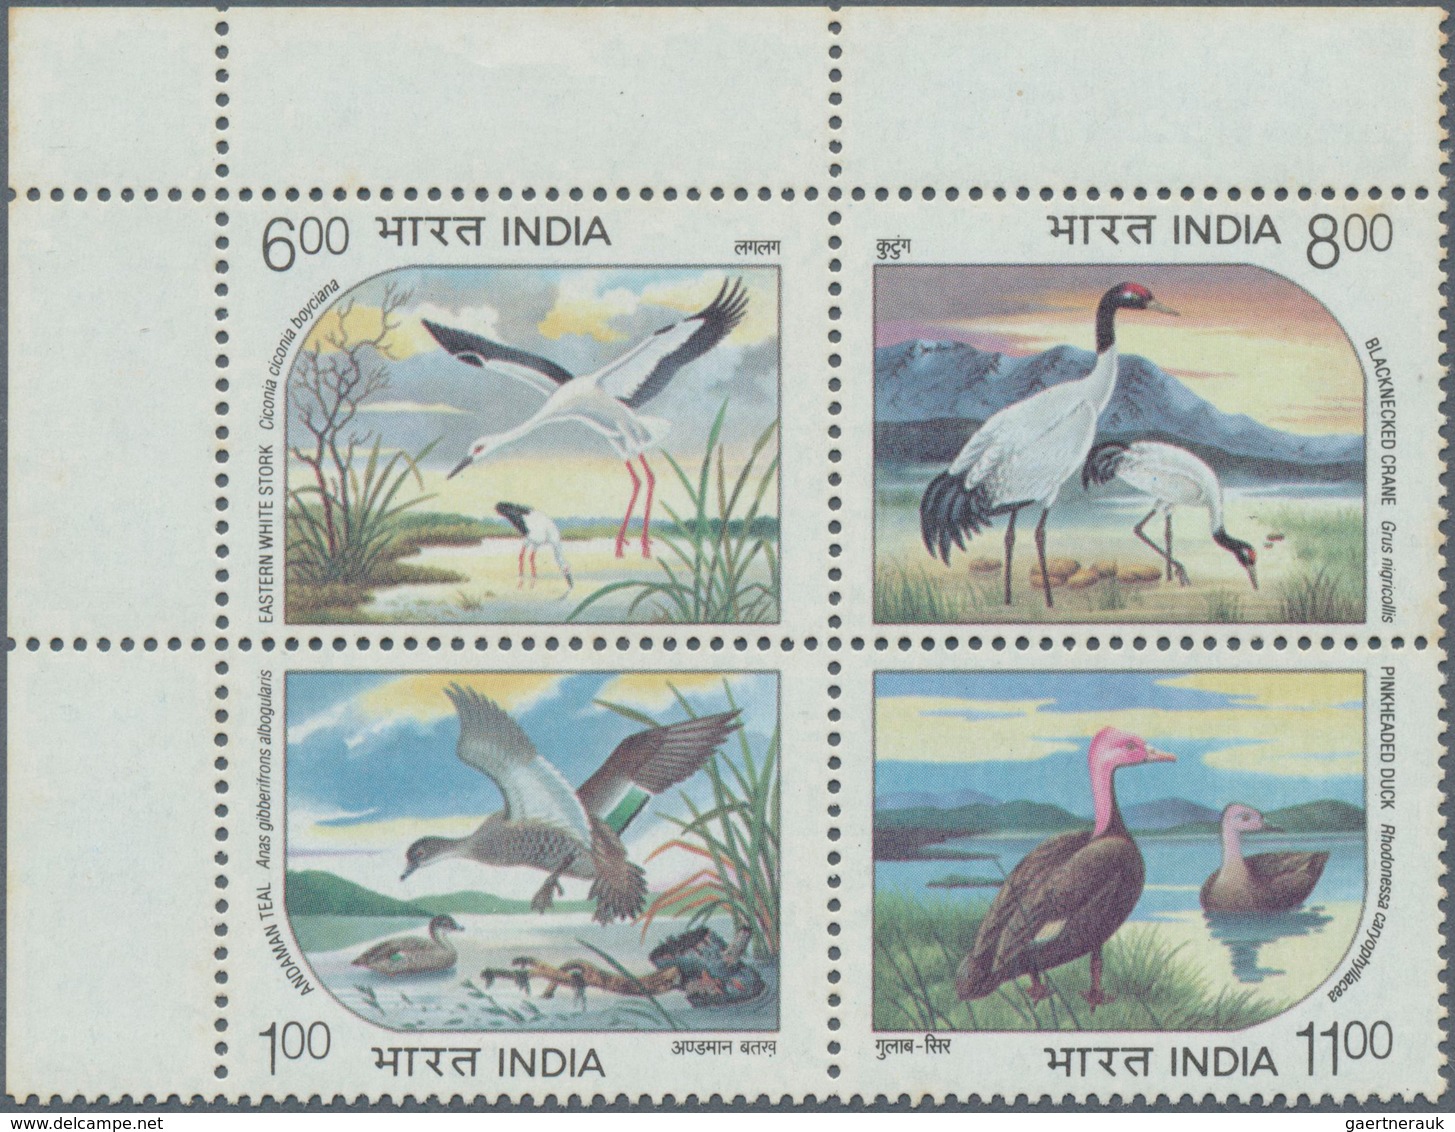 22727 Indien: 1947-2000's ca.: Comprehensive stock of single stamps, complete sets, blocks of four, other